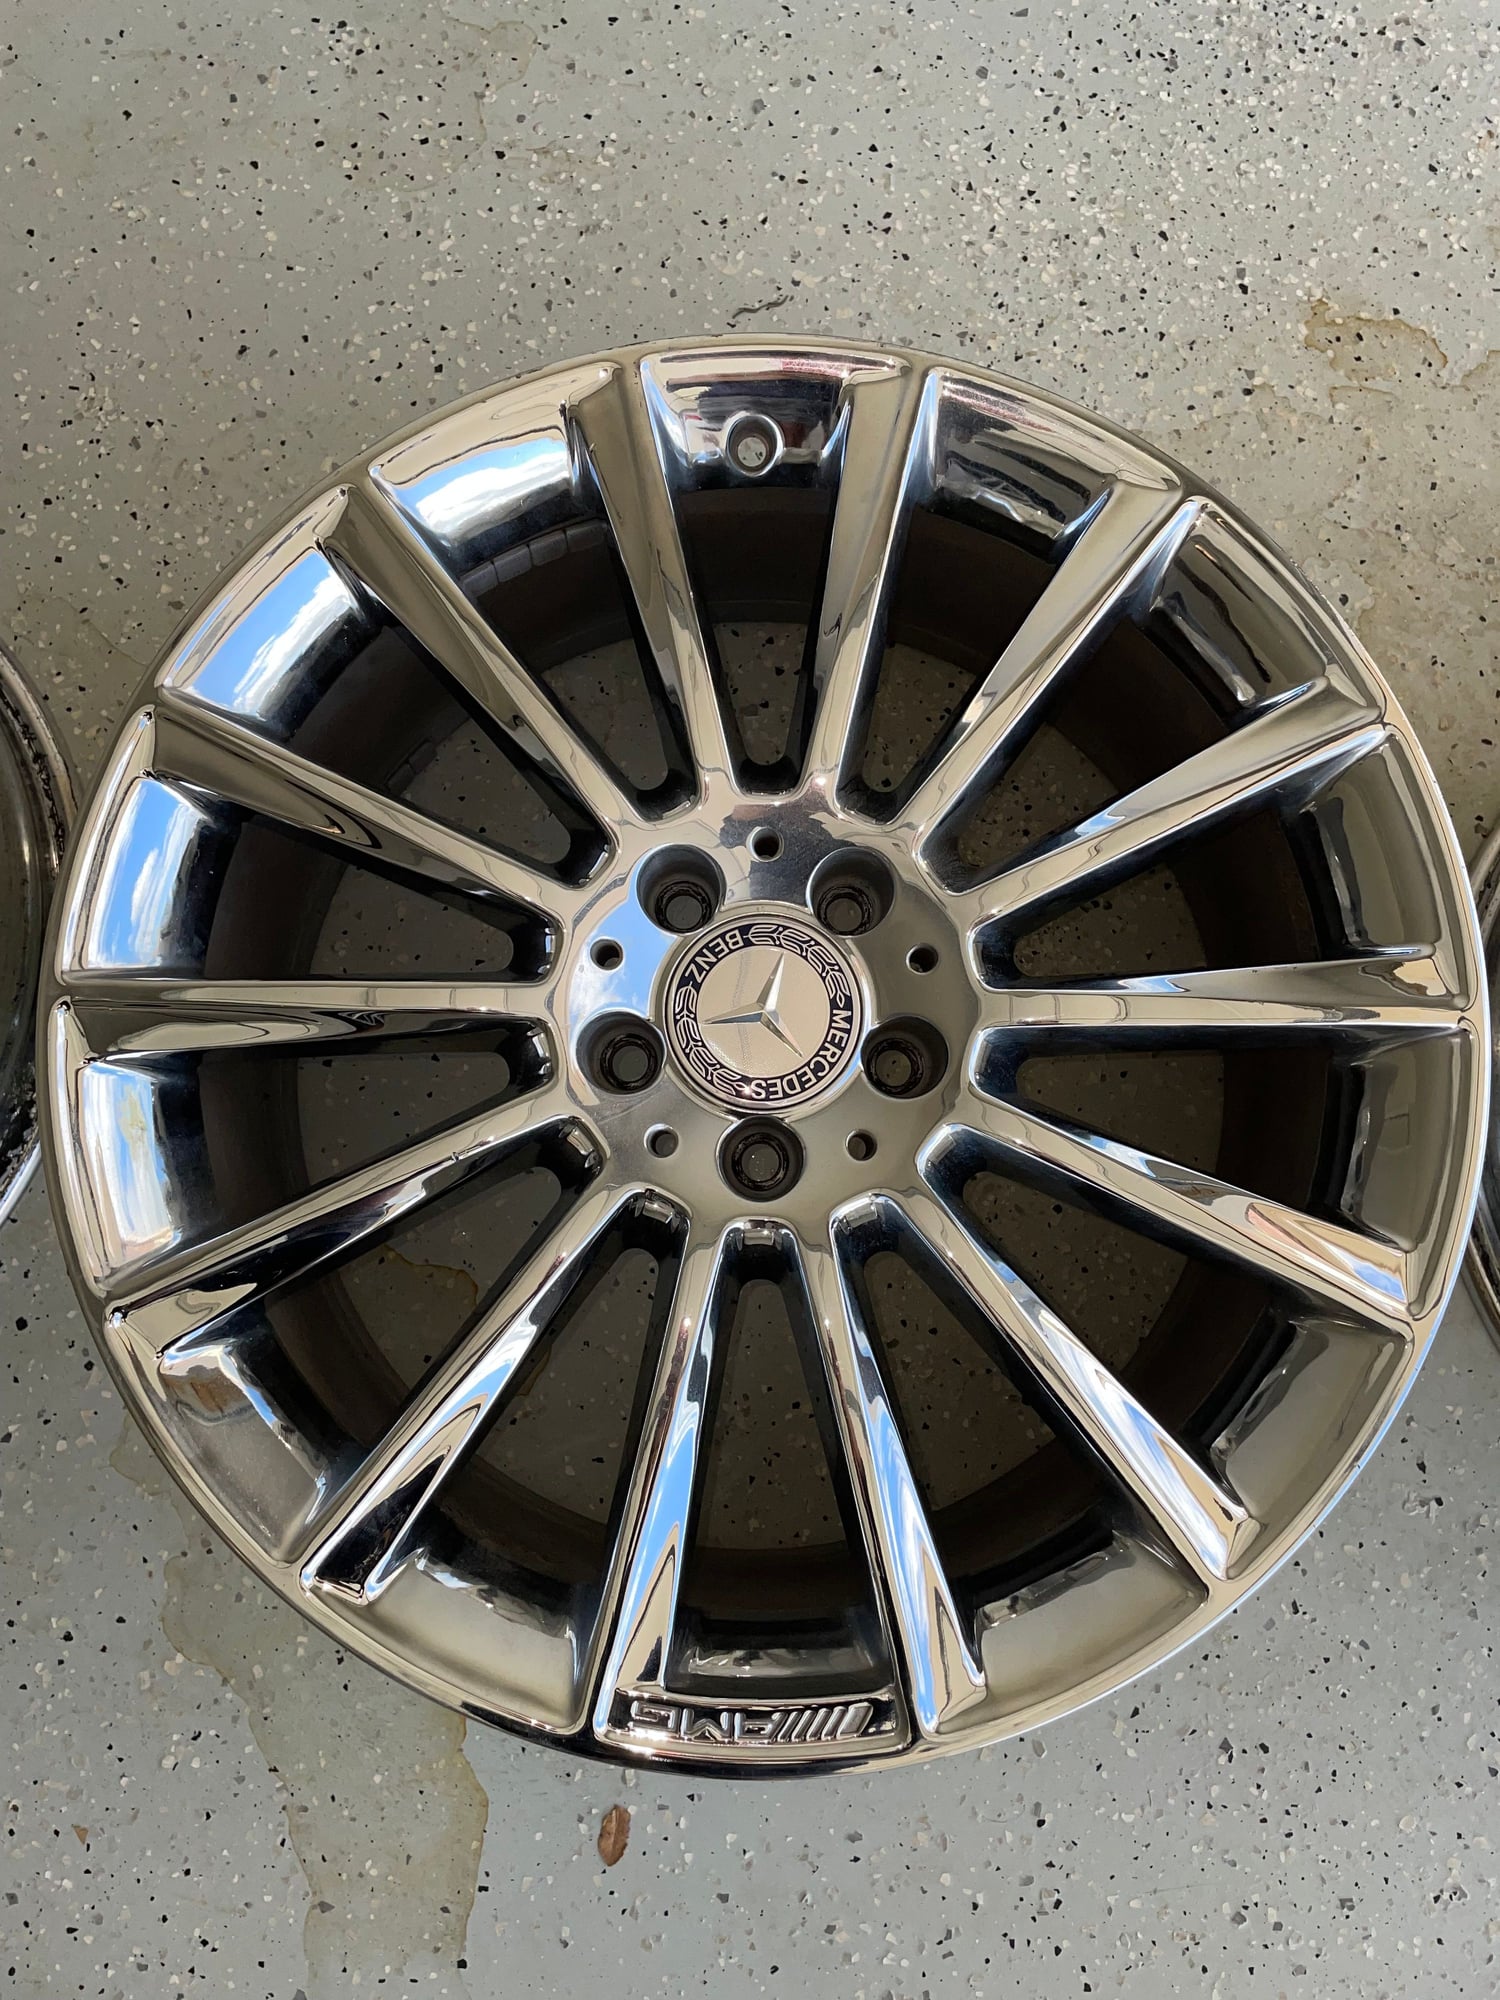 Wheels and Tires/Axles - 4x AMG 19 inch W205 C300 Multispoke Chrome Wheels - Used - 2015 to 2021 Mercedes-Benz C63 AMG - 2015 to 2021 Mercedes-Benz C-Class - Dallas, TX 75201, United States